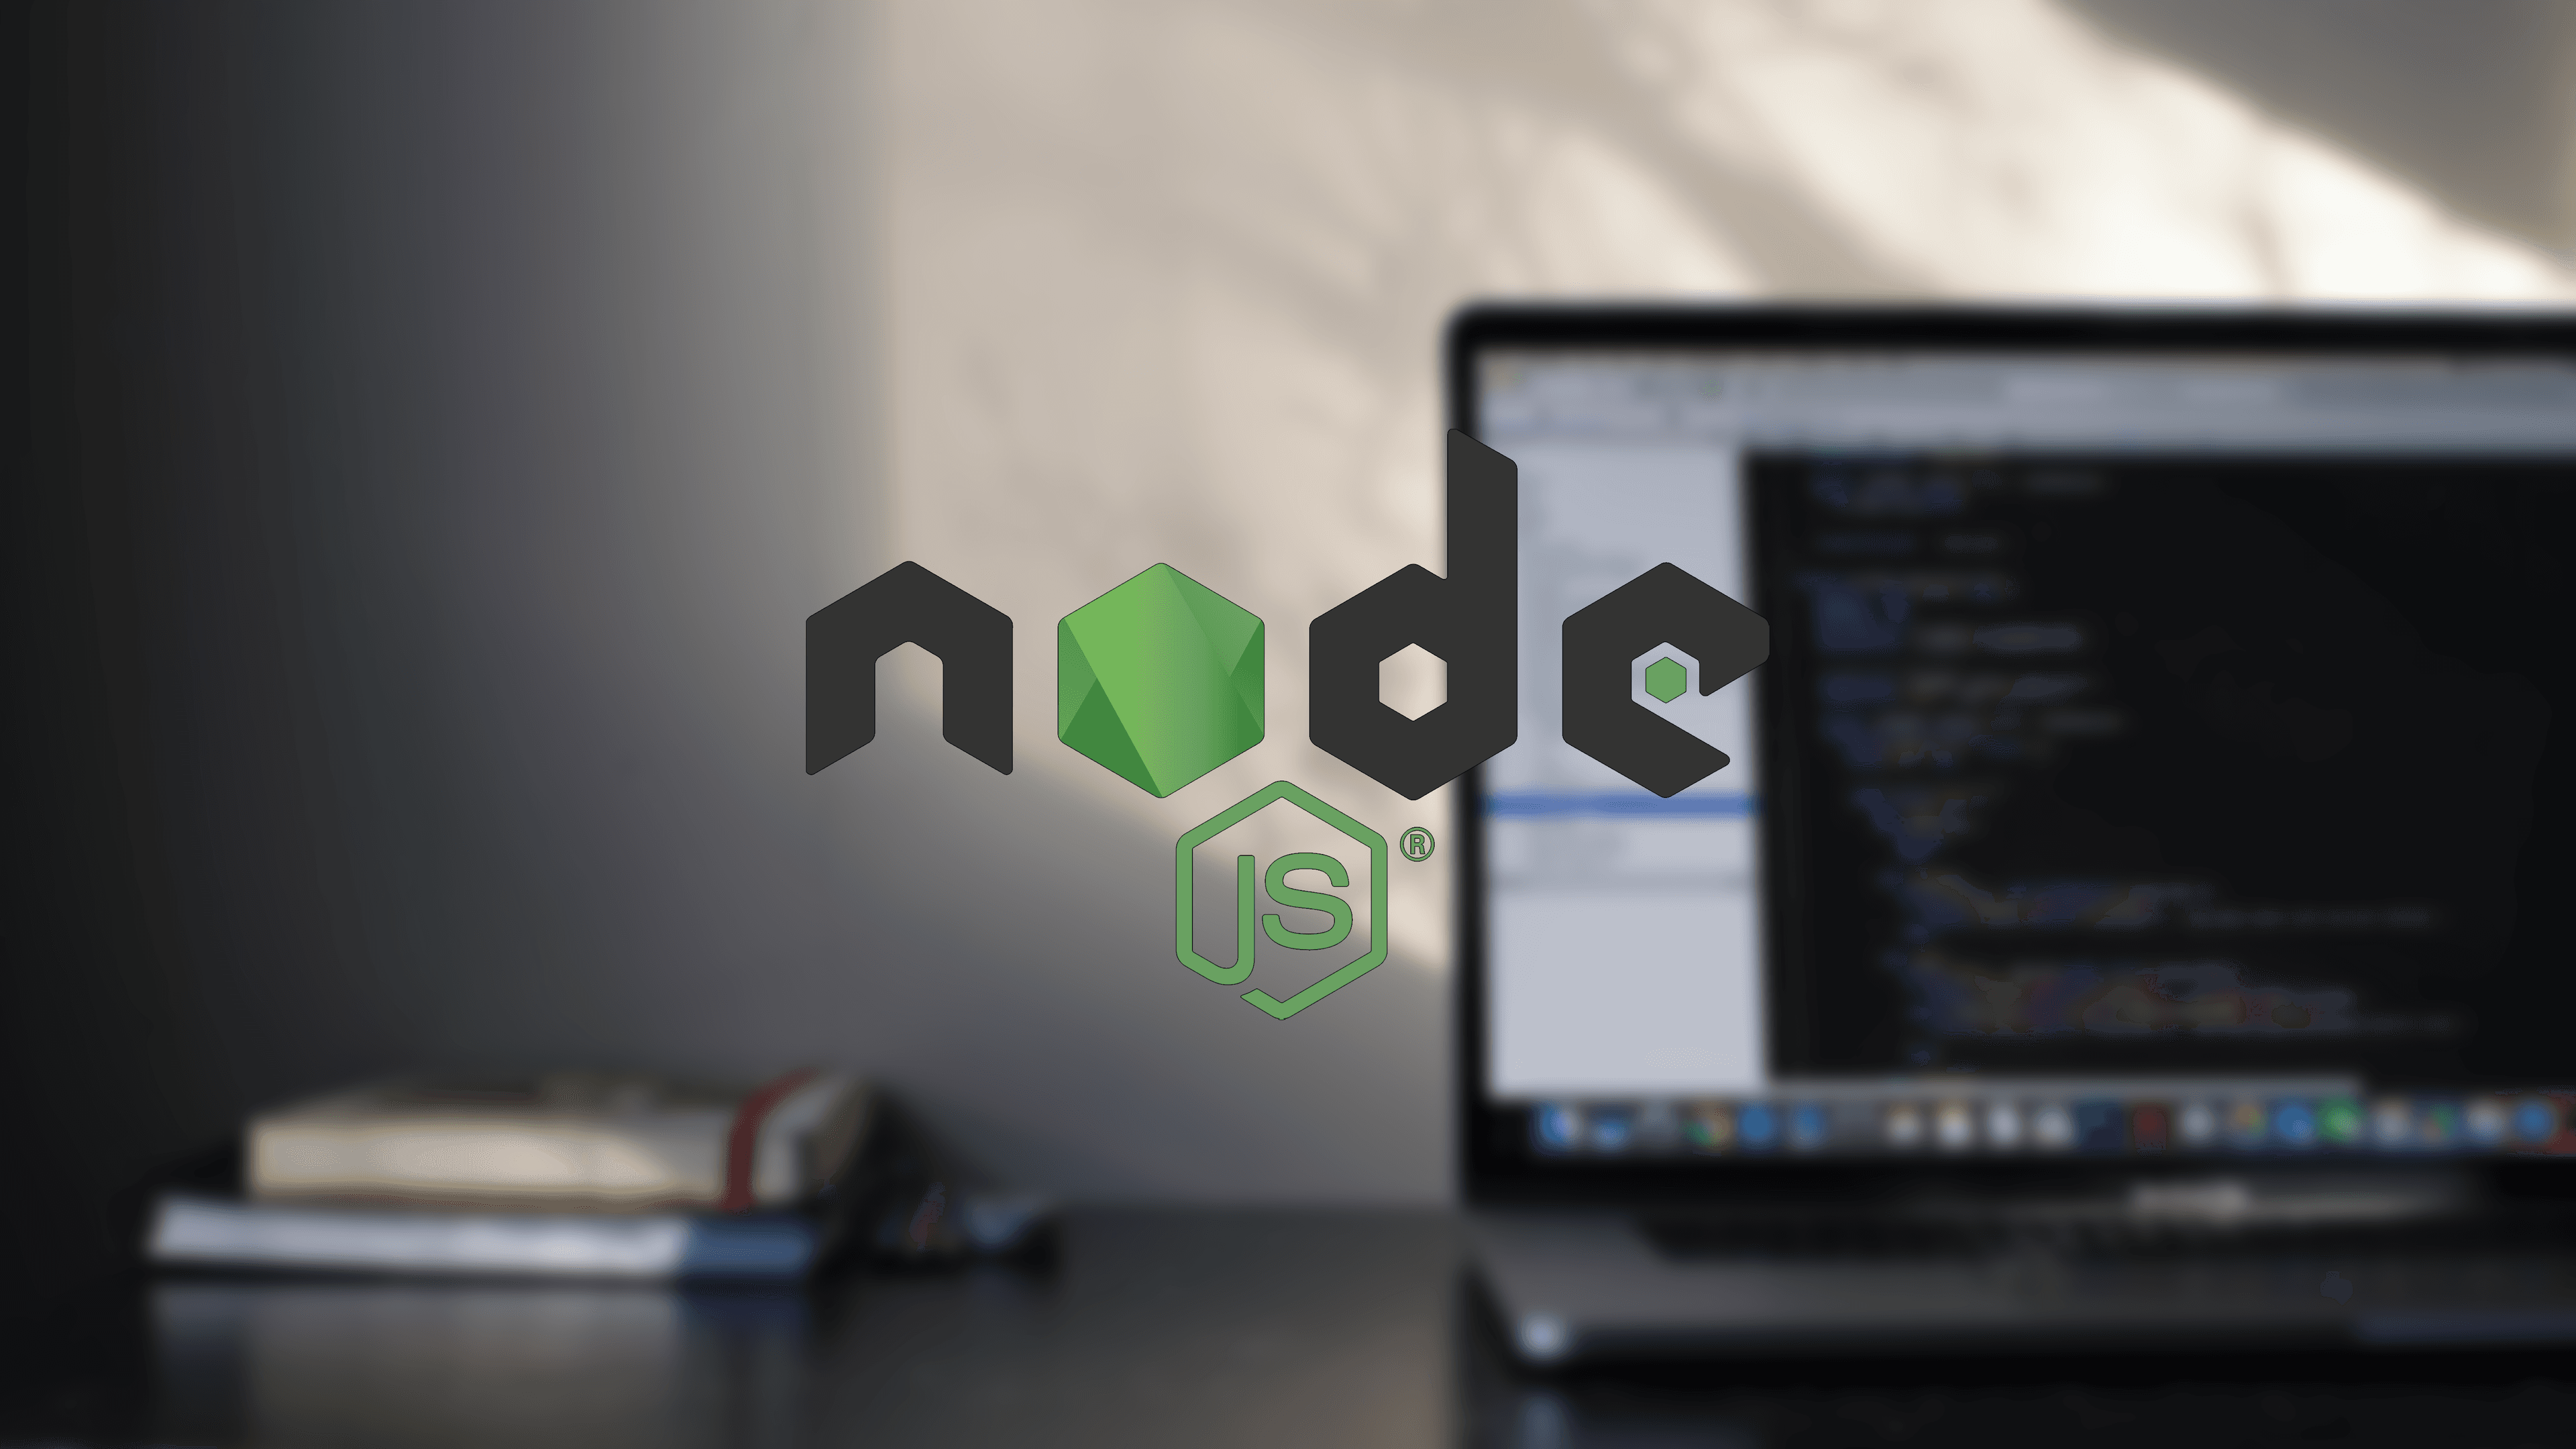 Laptop with code on-screen with Node.js logo